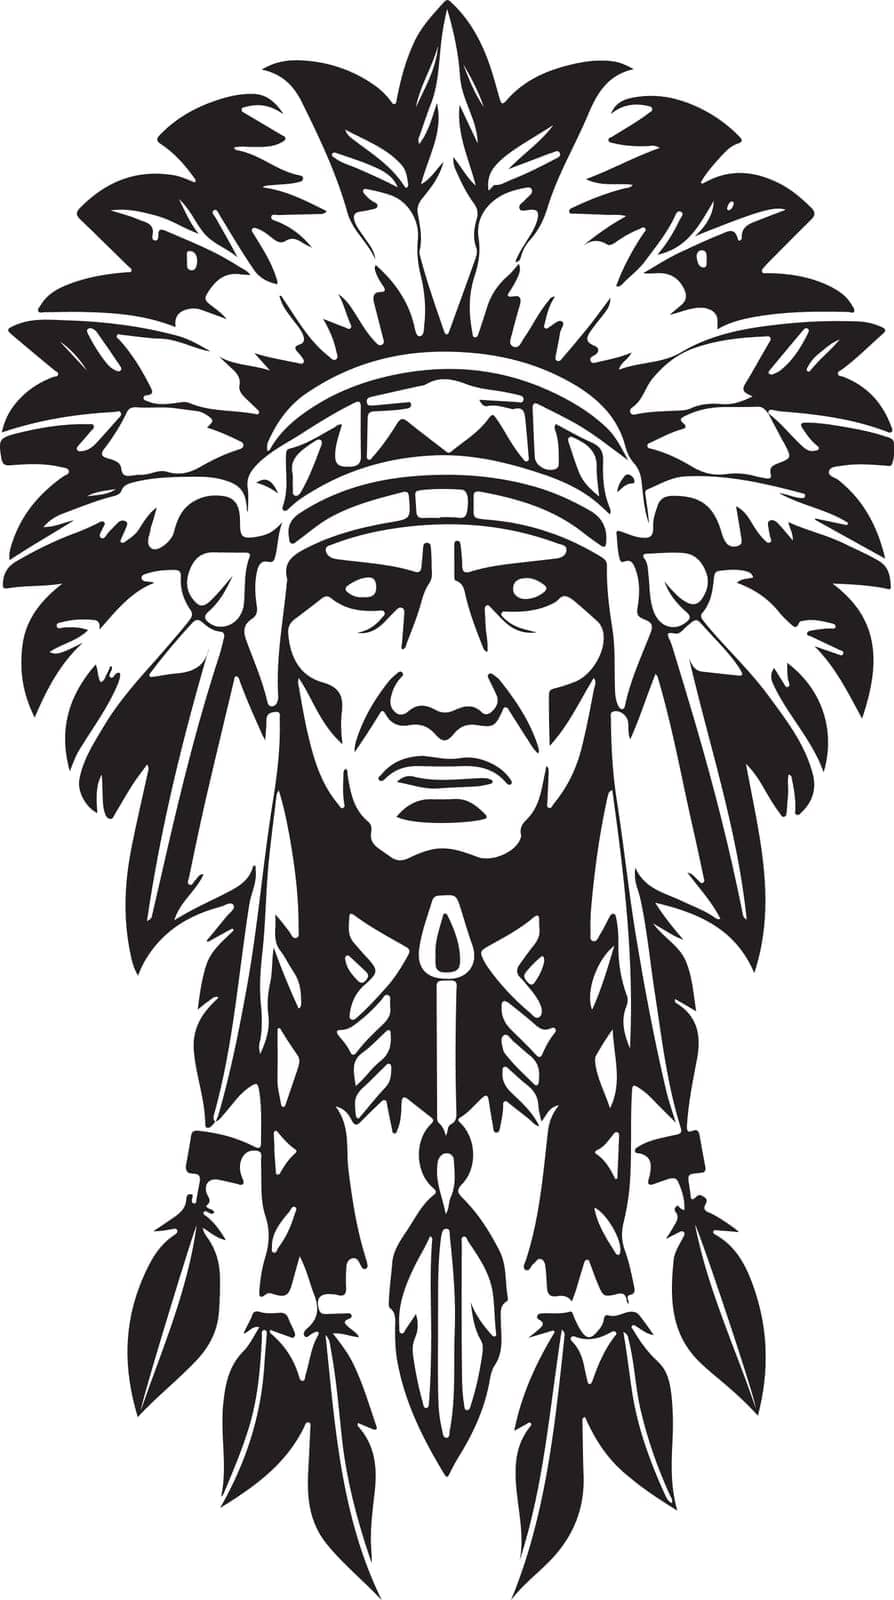 A Breathtaking iconic Native American chief in a black and white vector illustration, Suitable for logo design, tattoo design or print on demand. Vector illustration